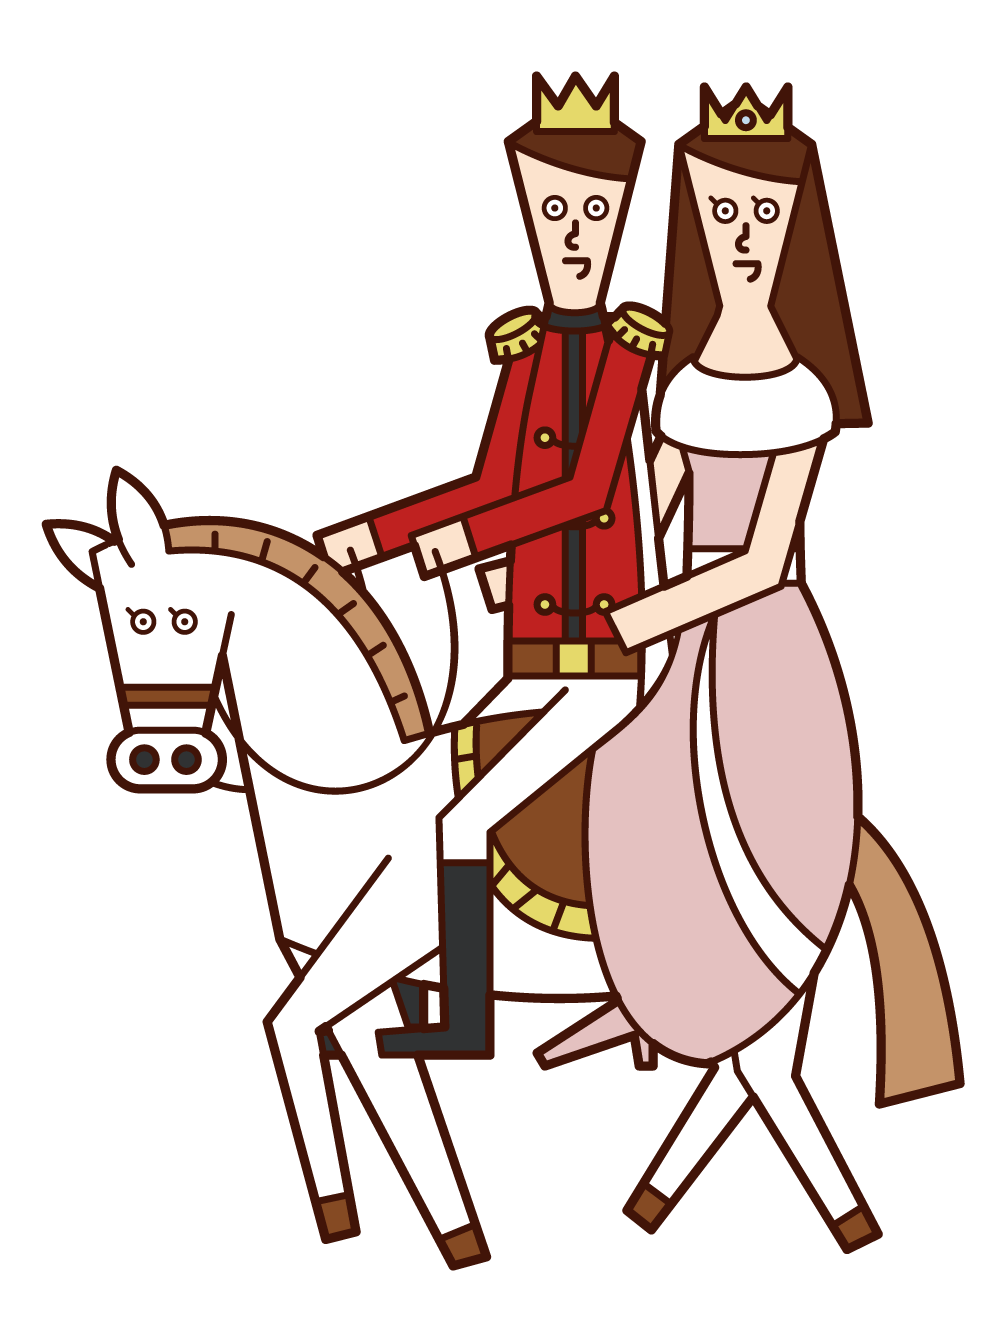 Illustration of a prince and a princess on a white horse